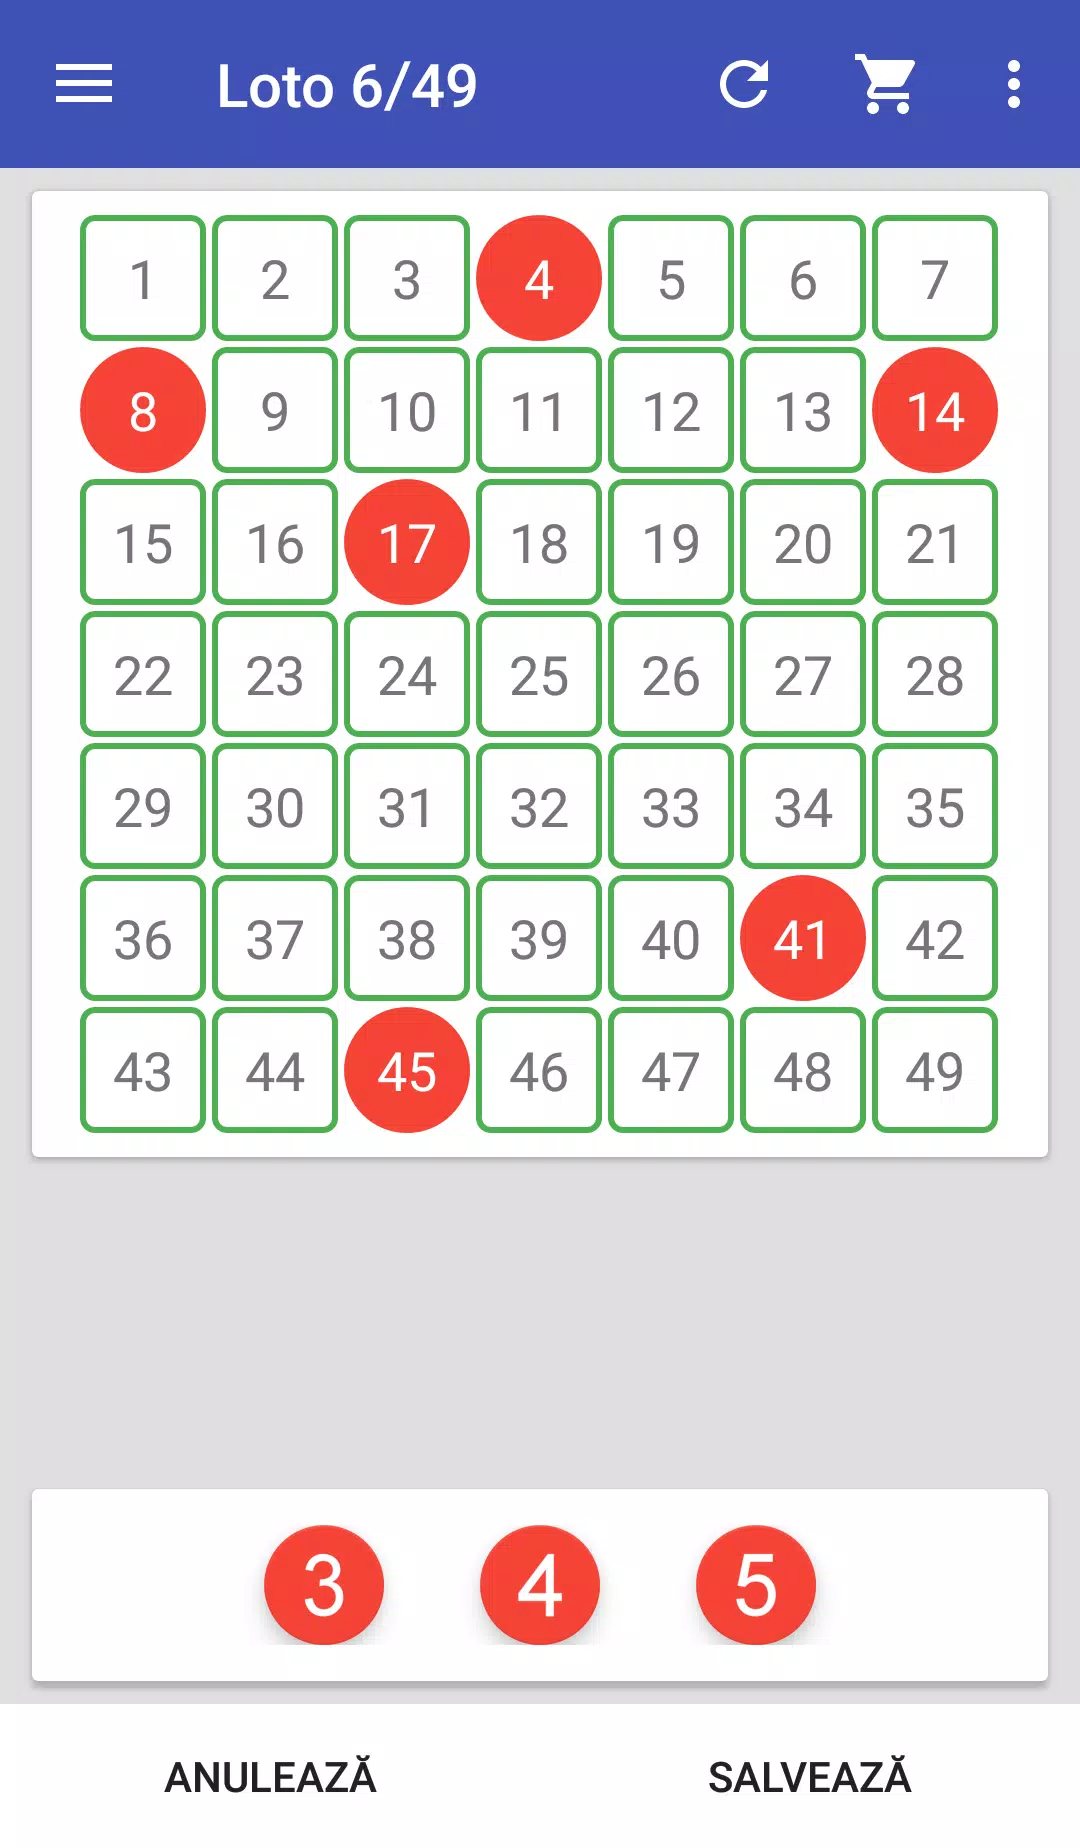 Loto RO for Android - APK Download